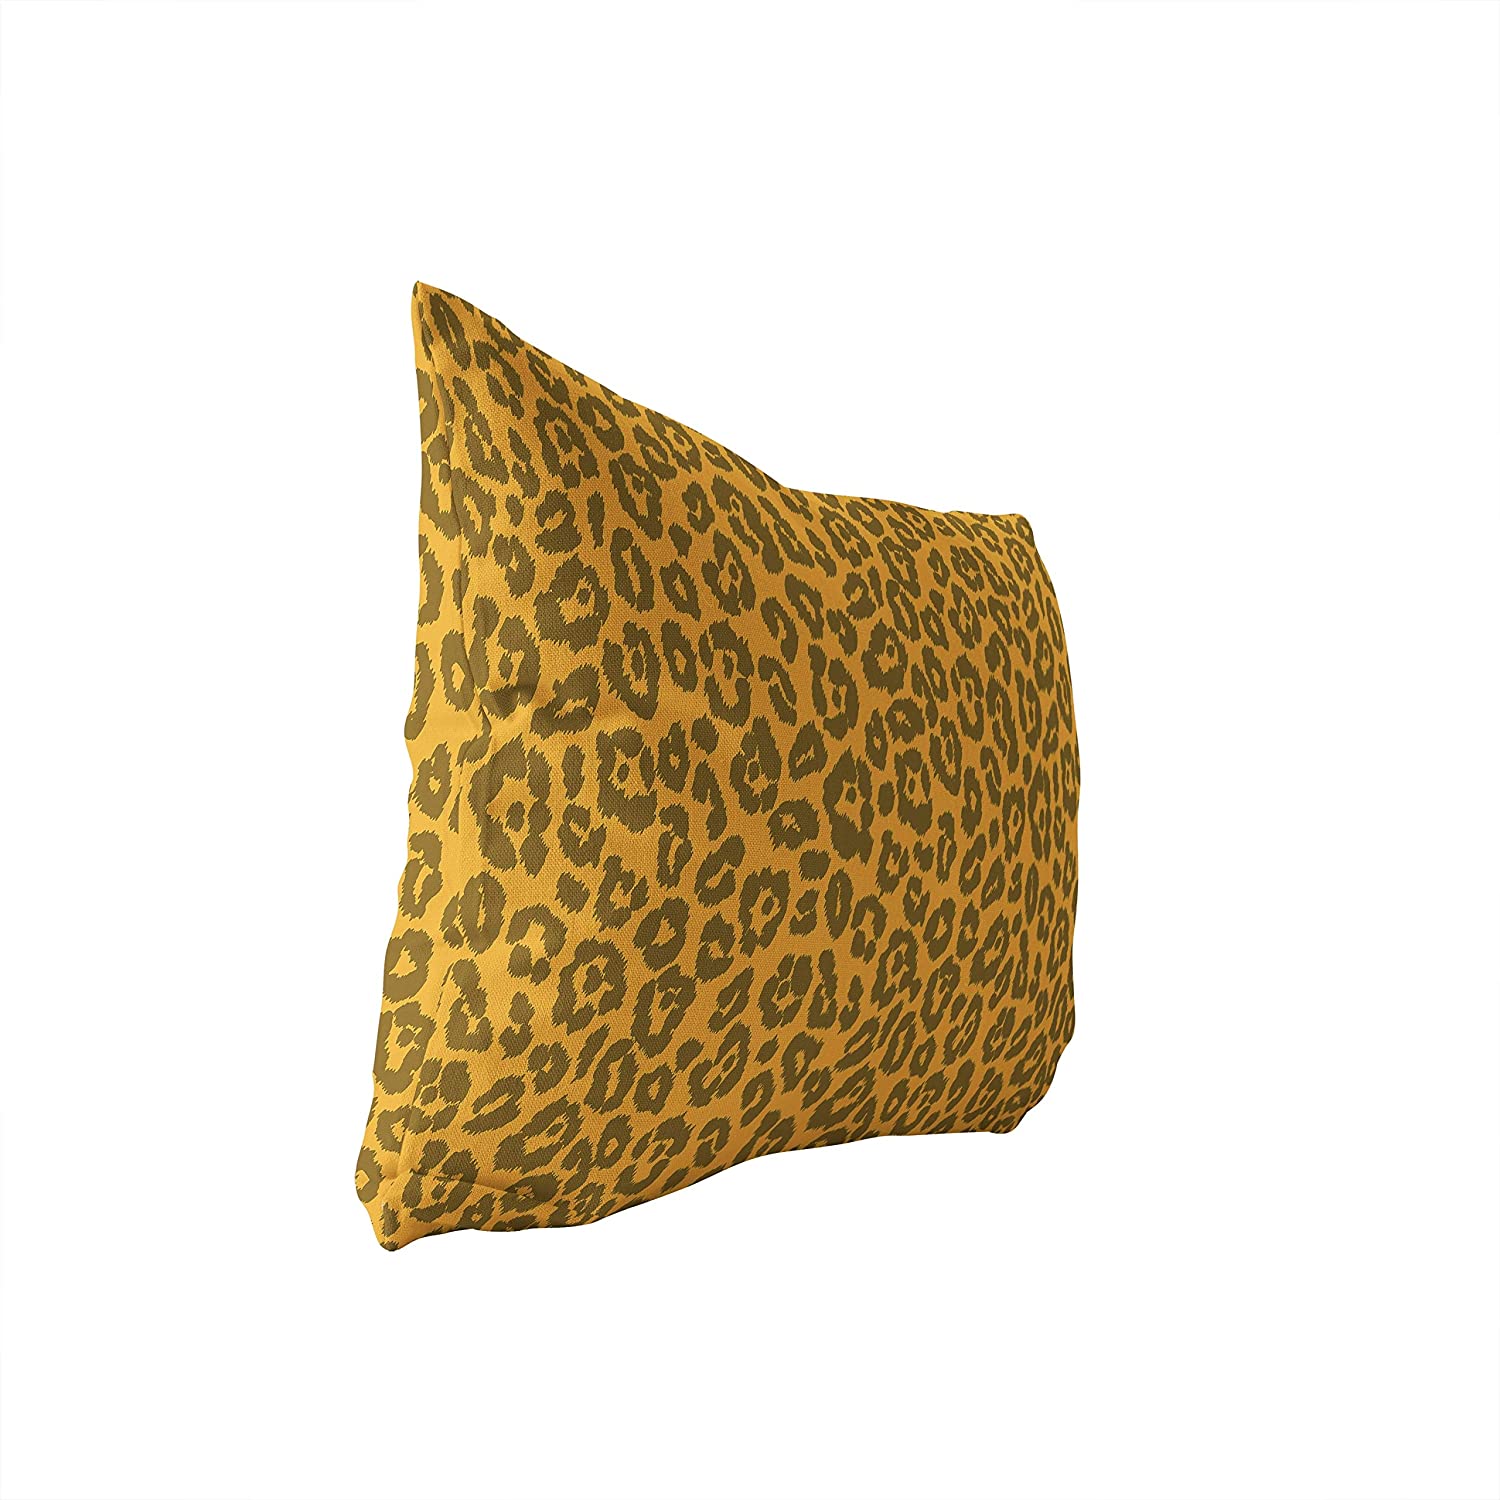 UKN Leopard Gold Lumbar Pillow Gold Animal Modern Contemporary Polyester Single Removable Cover